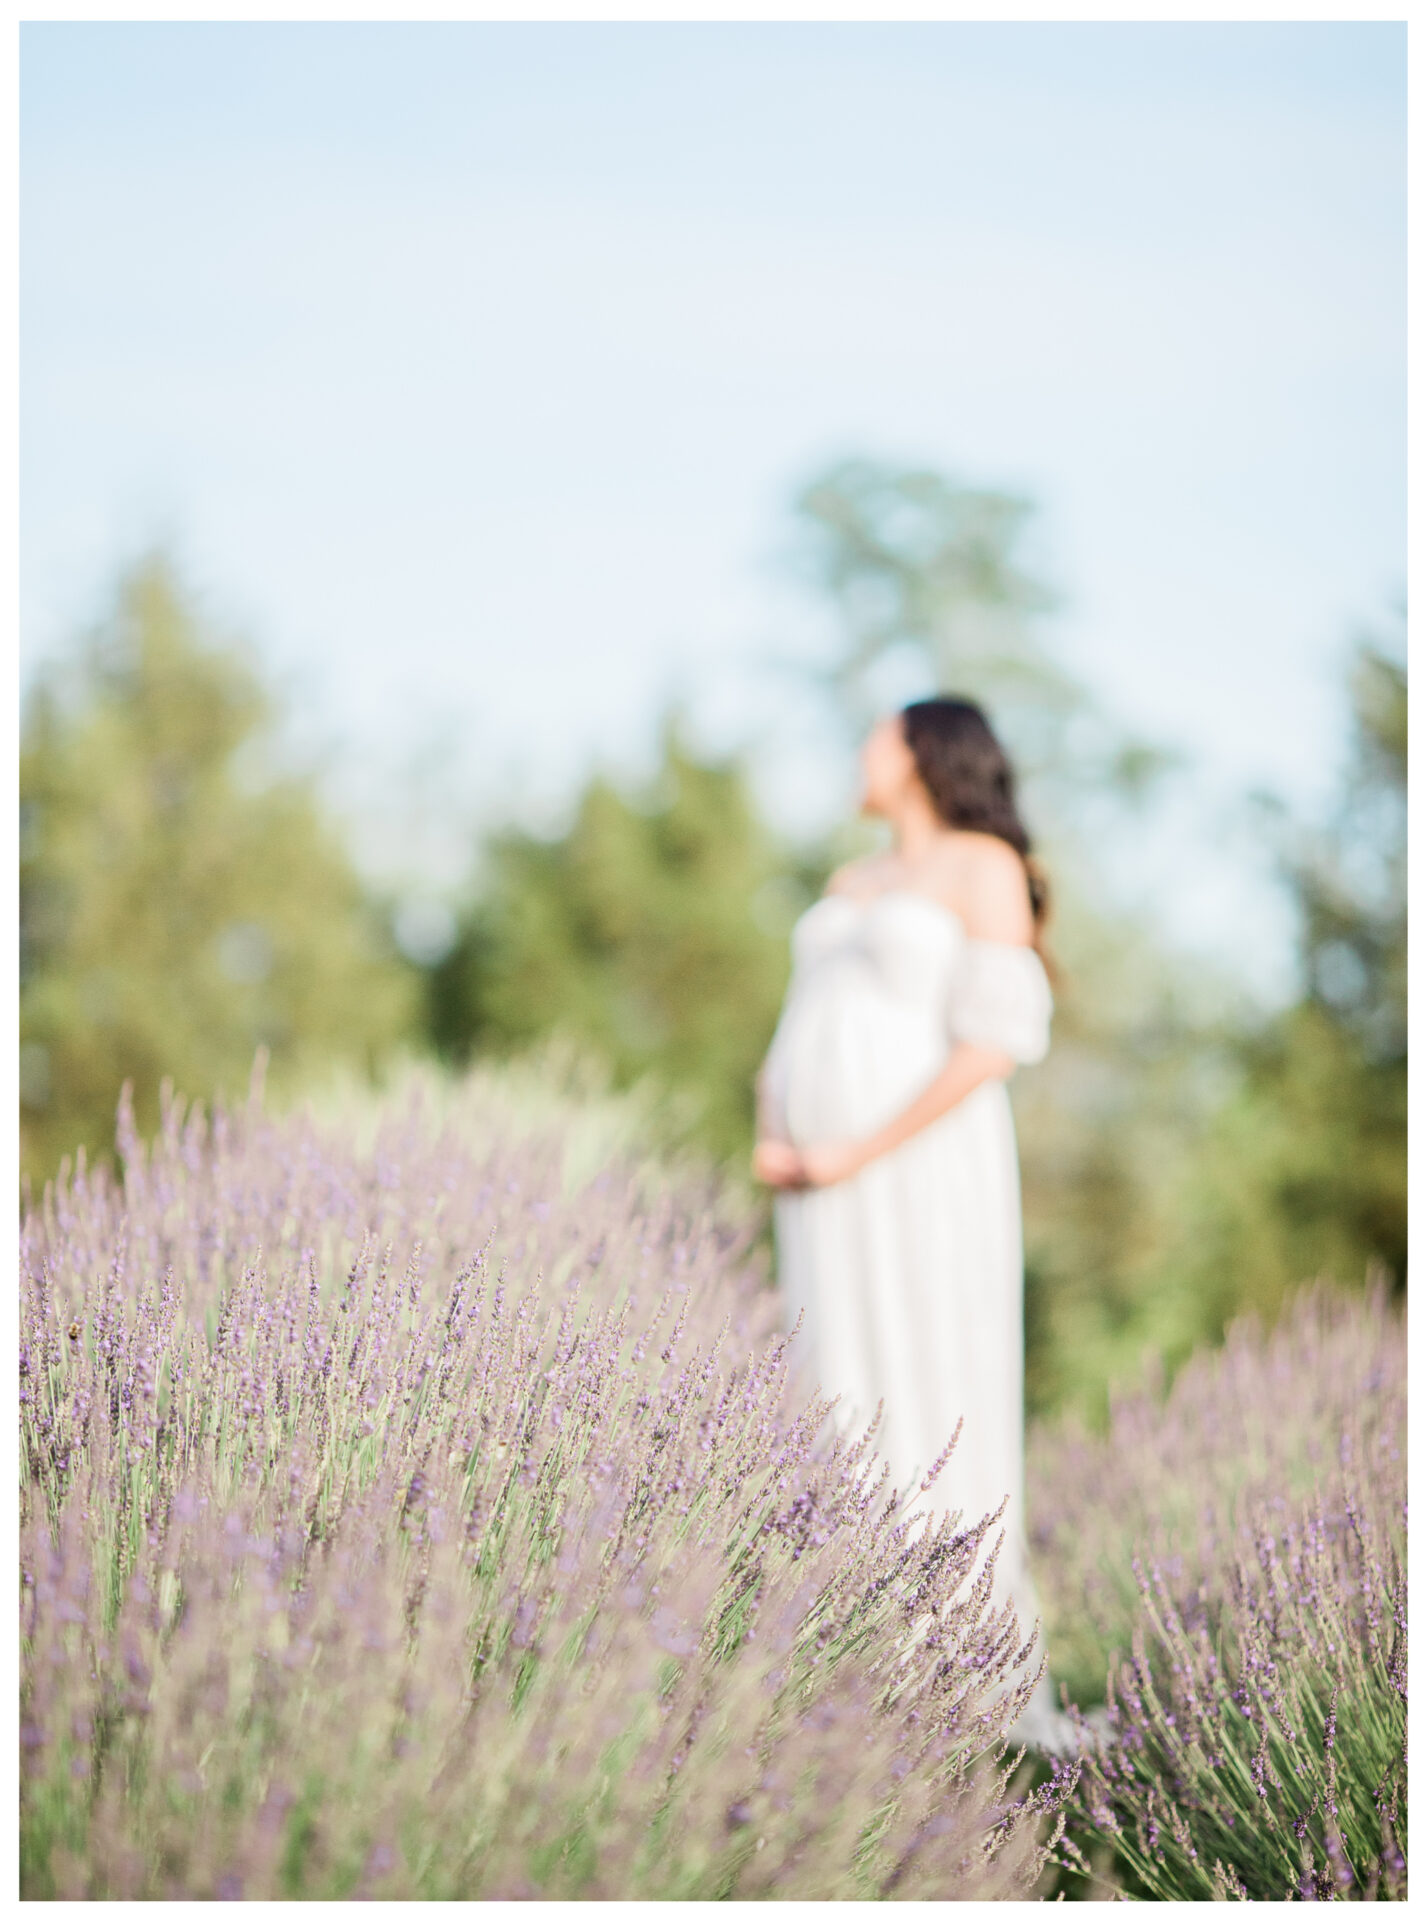 Dayton Maternity Photography | Winter Freire Photography | Dayton, Ohio Photographer | Organic Maternity Spring Session Centerville, OH | Timeless Organic Maternity Portraits | Lavender Field Photography Ohio | Dreamy Lavender Field Maternity Session